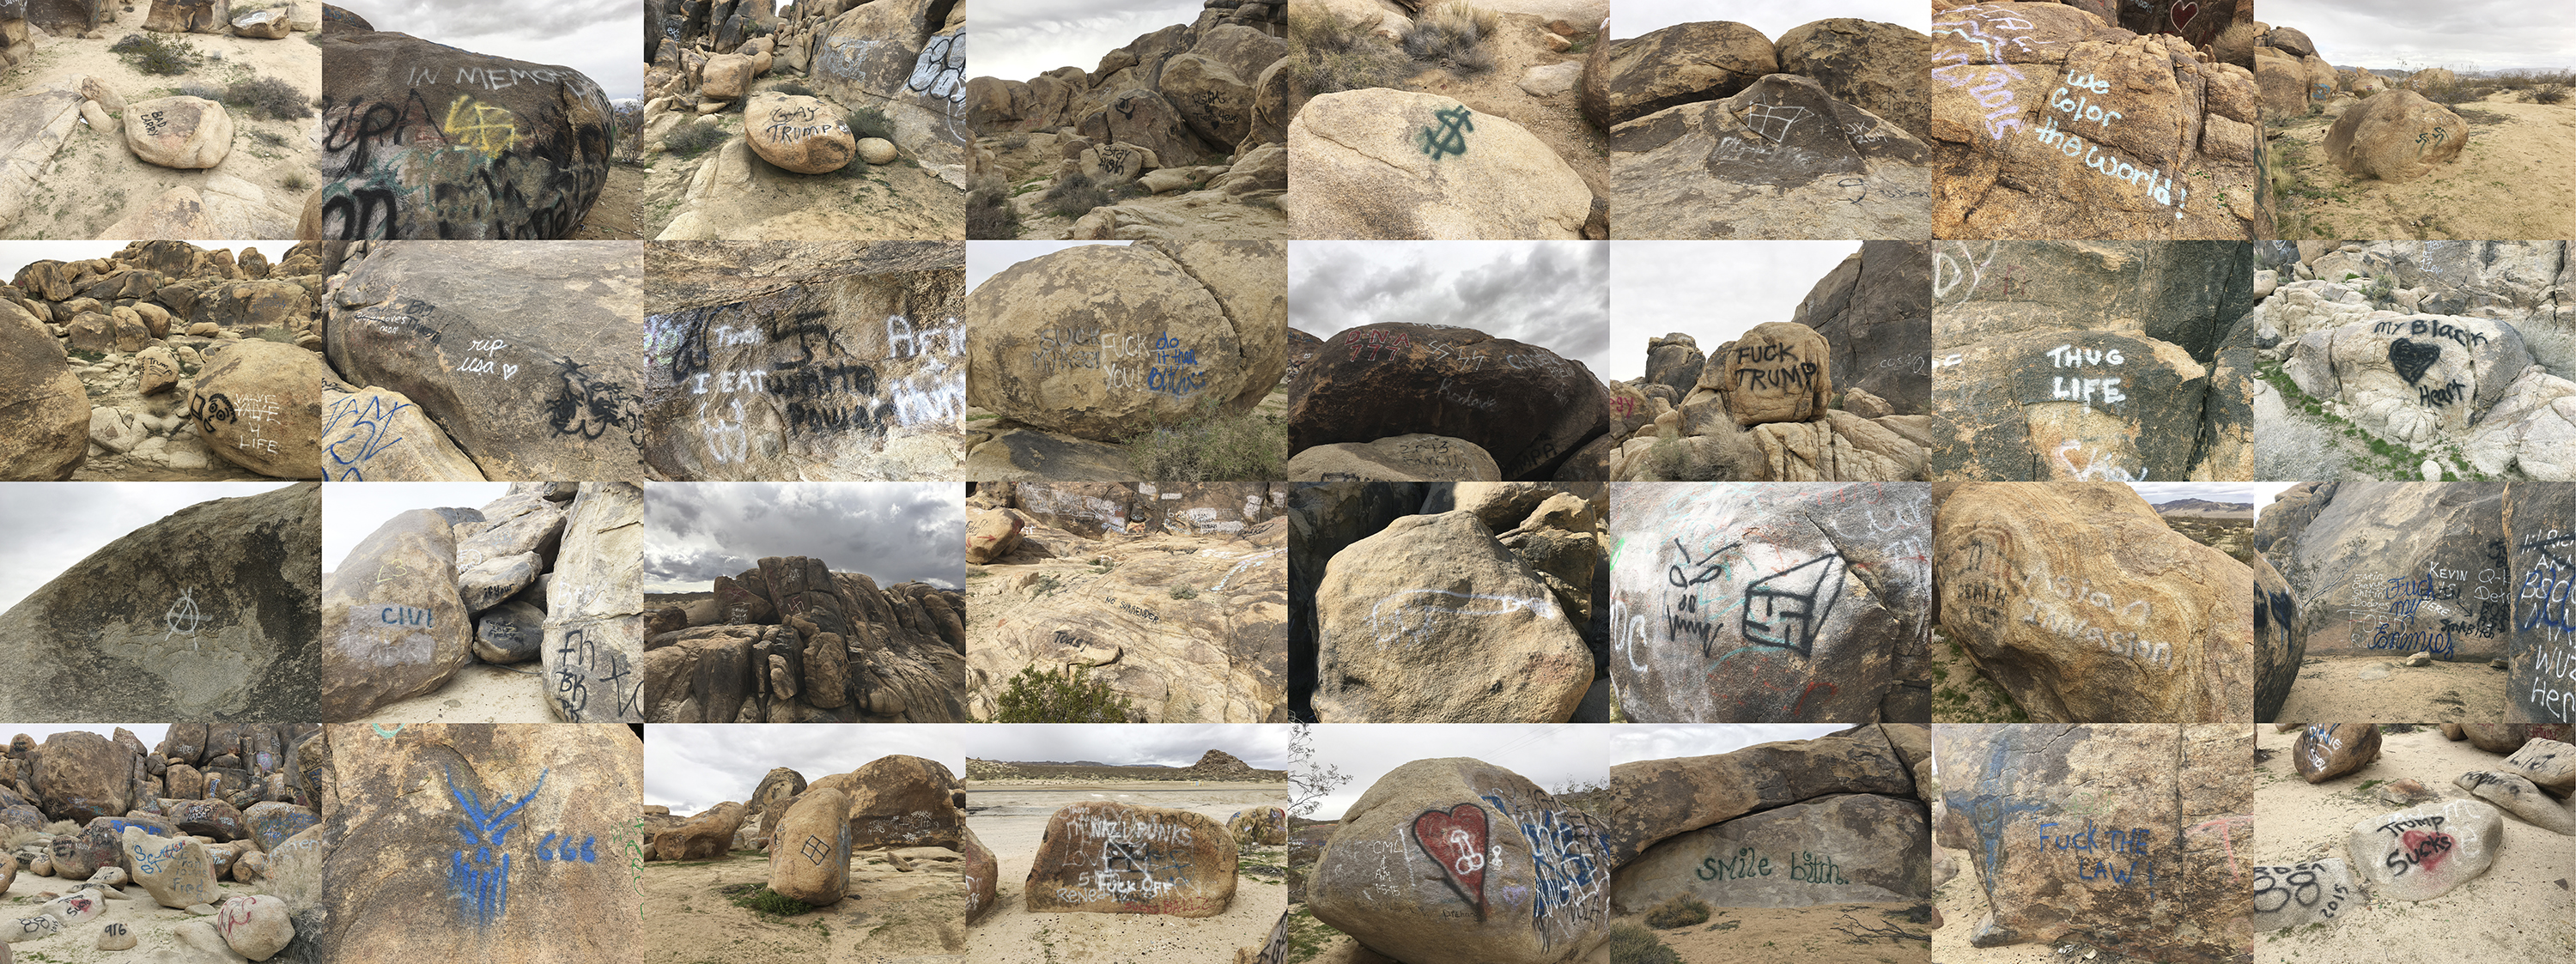 Tagged Boulders (nazi grid), Lucerne Valley, California, 2017 